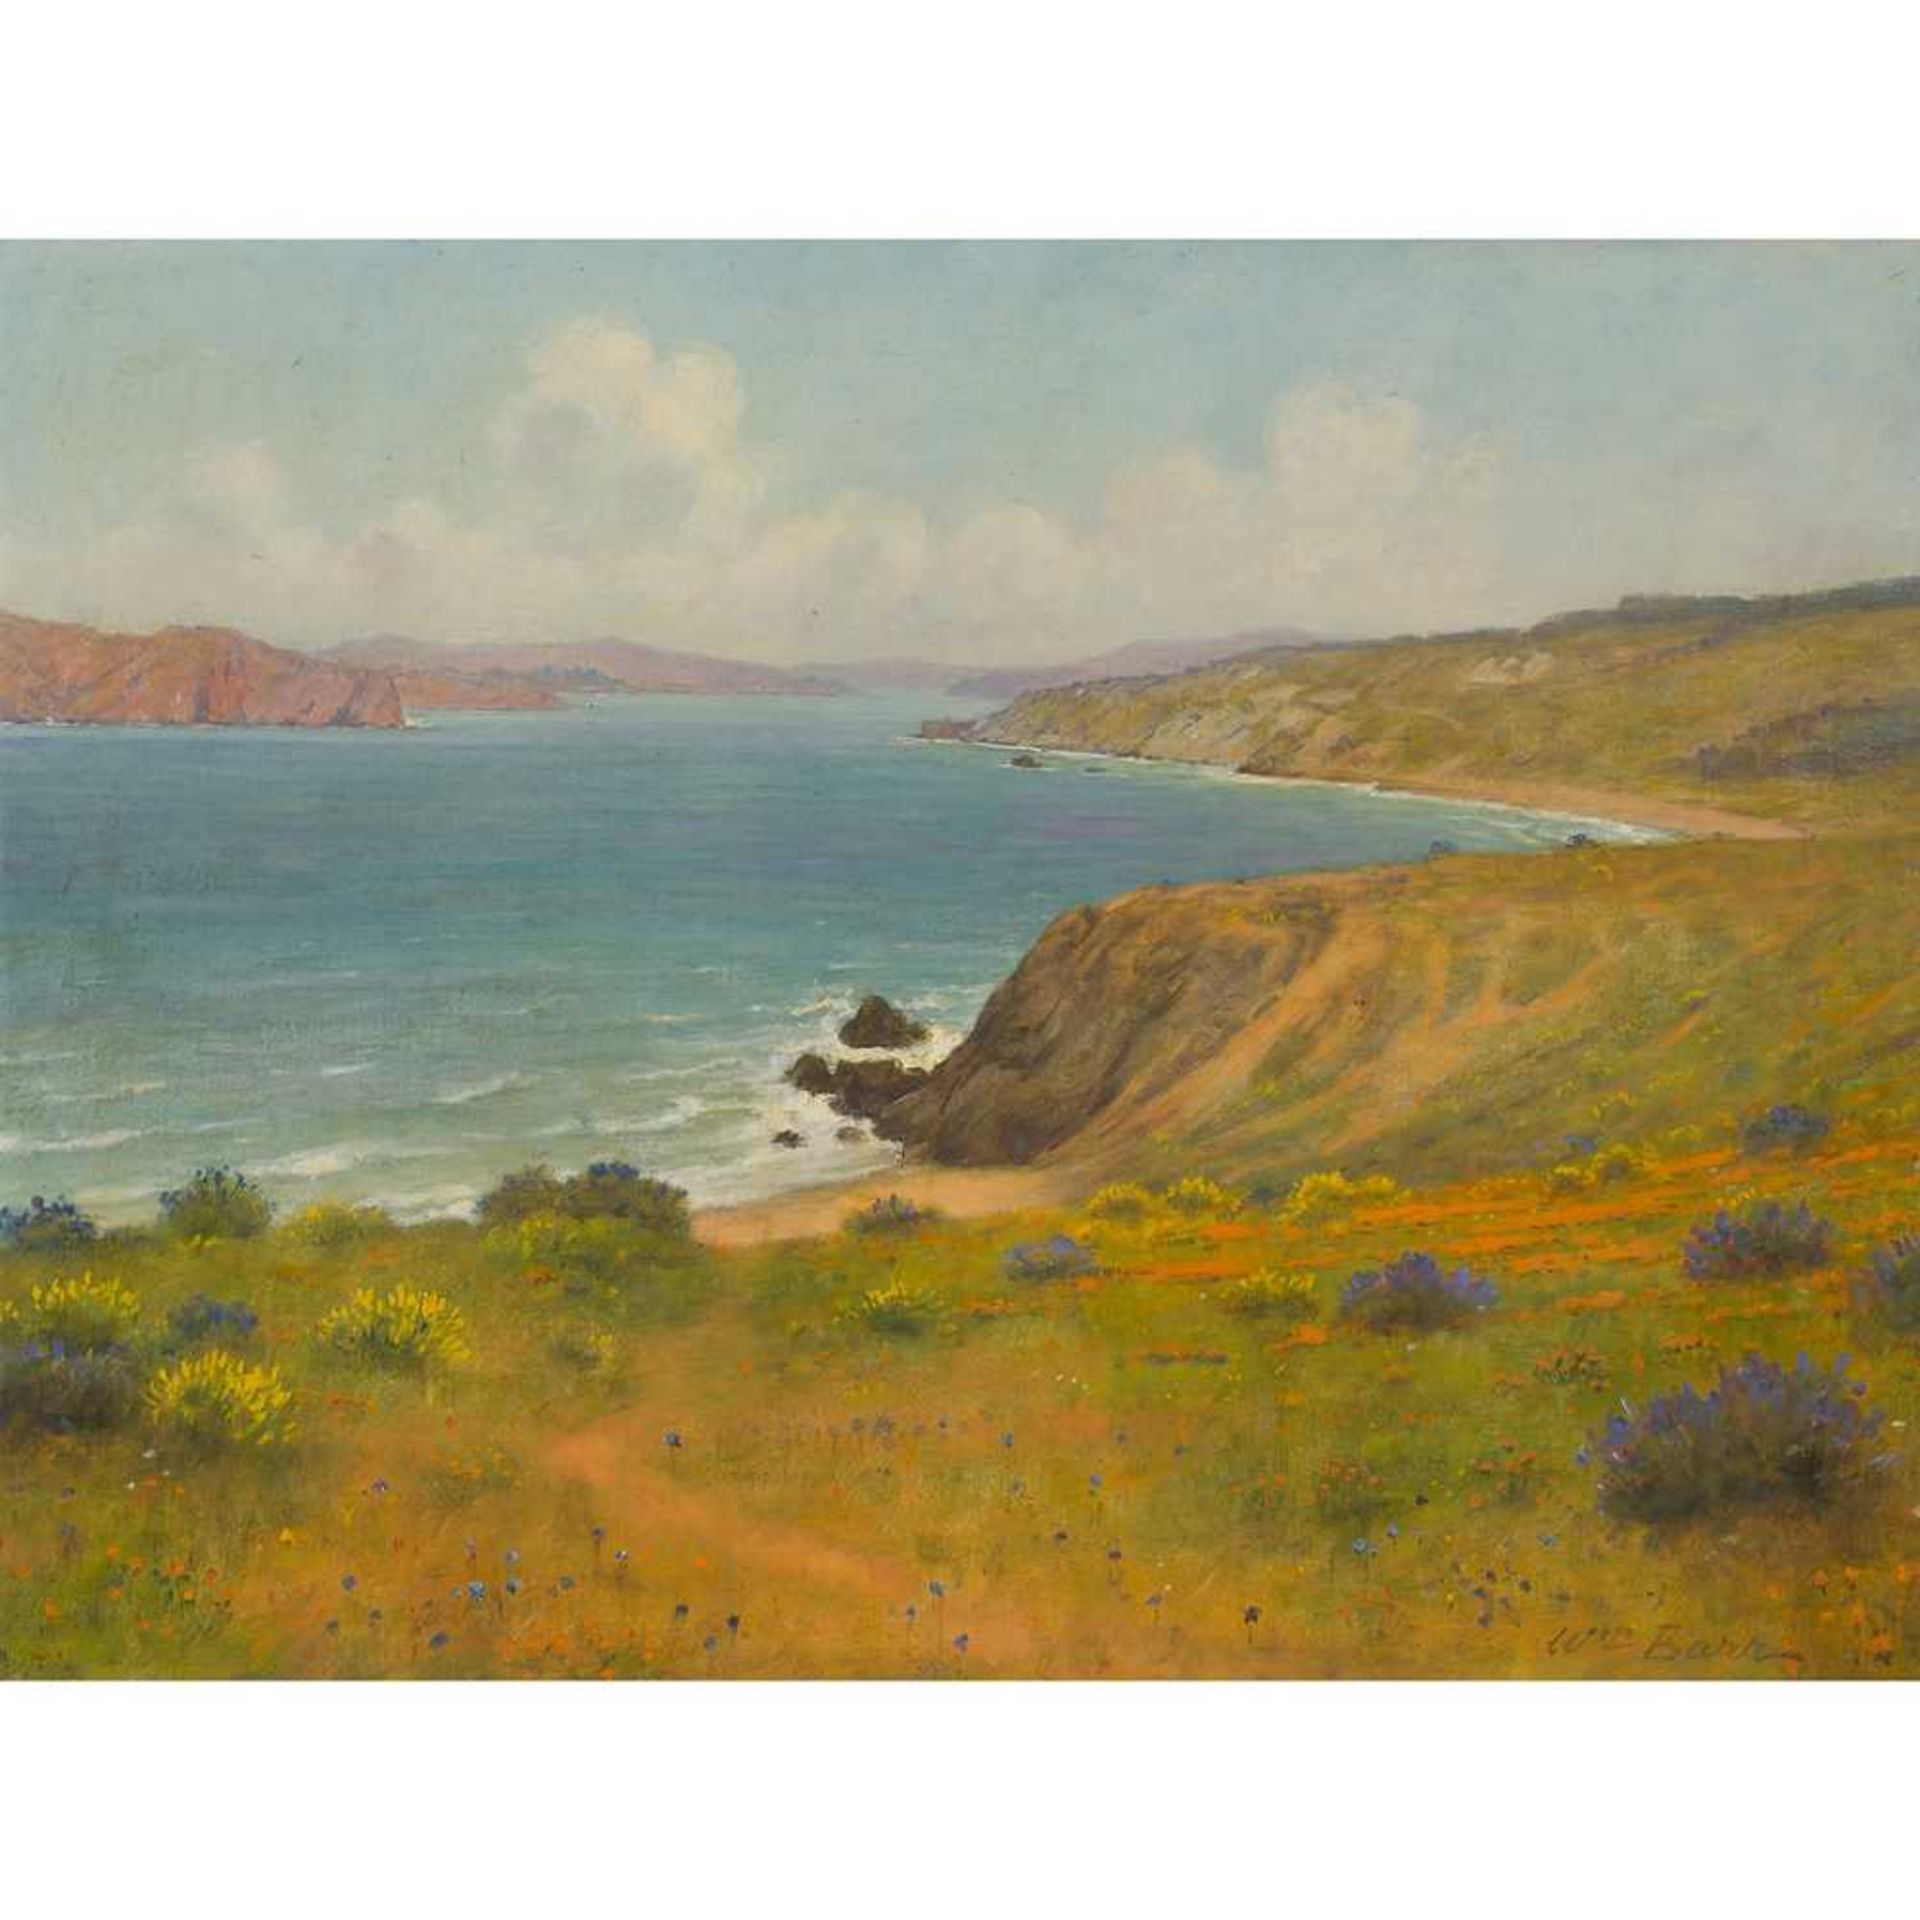 WILLIAM BARR (SCOTTISH/AMERICAN 1867-1933) SOUTHERN HEADLANDS OF THE GOLDEN GATE, CALIFORNIA